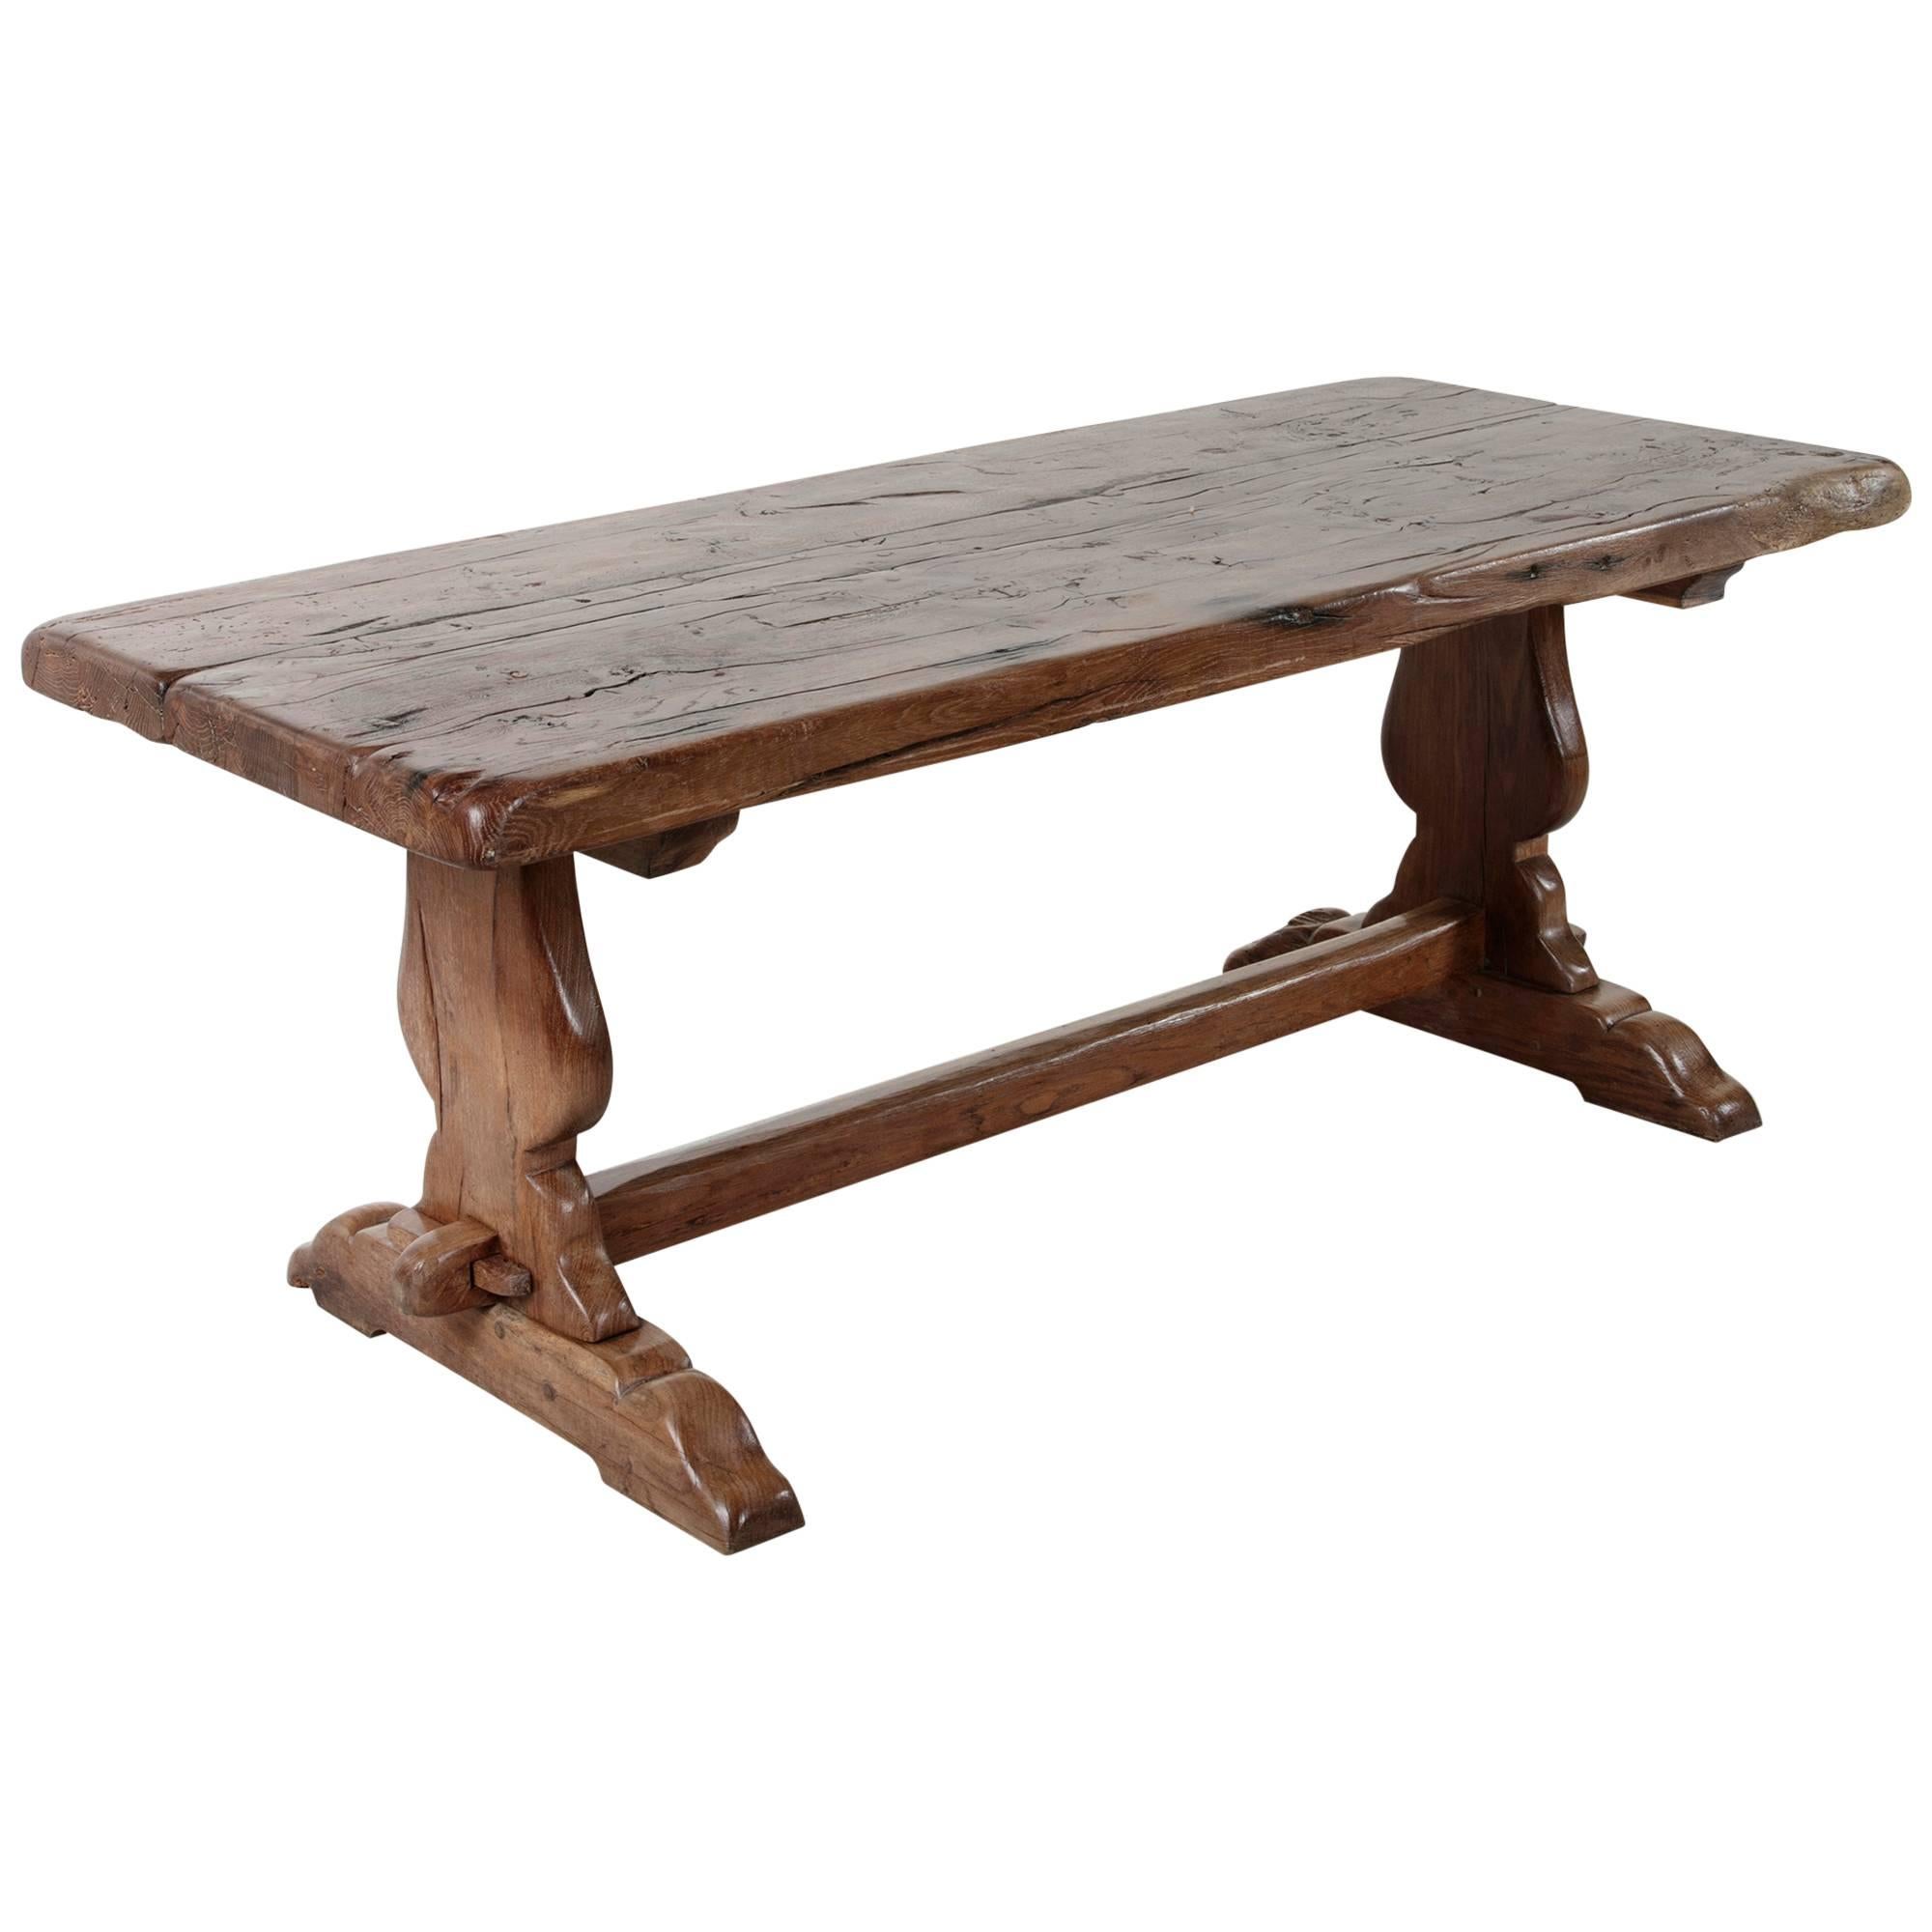 Antique French Farm Table in the Monastery Style of Solid Oak from 18th Century